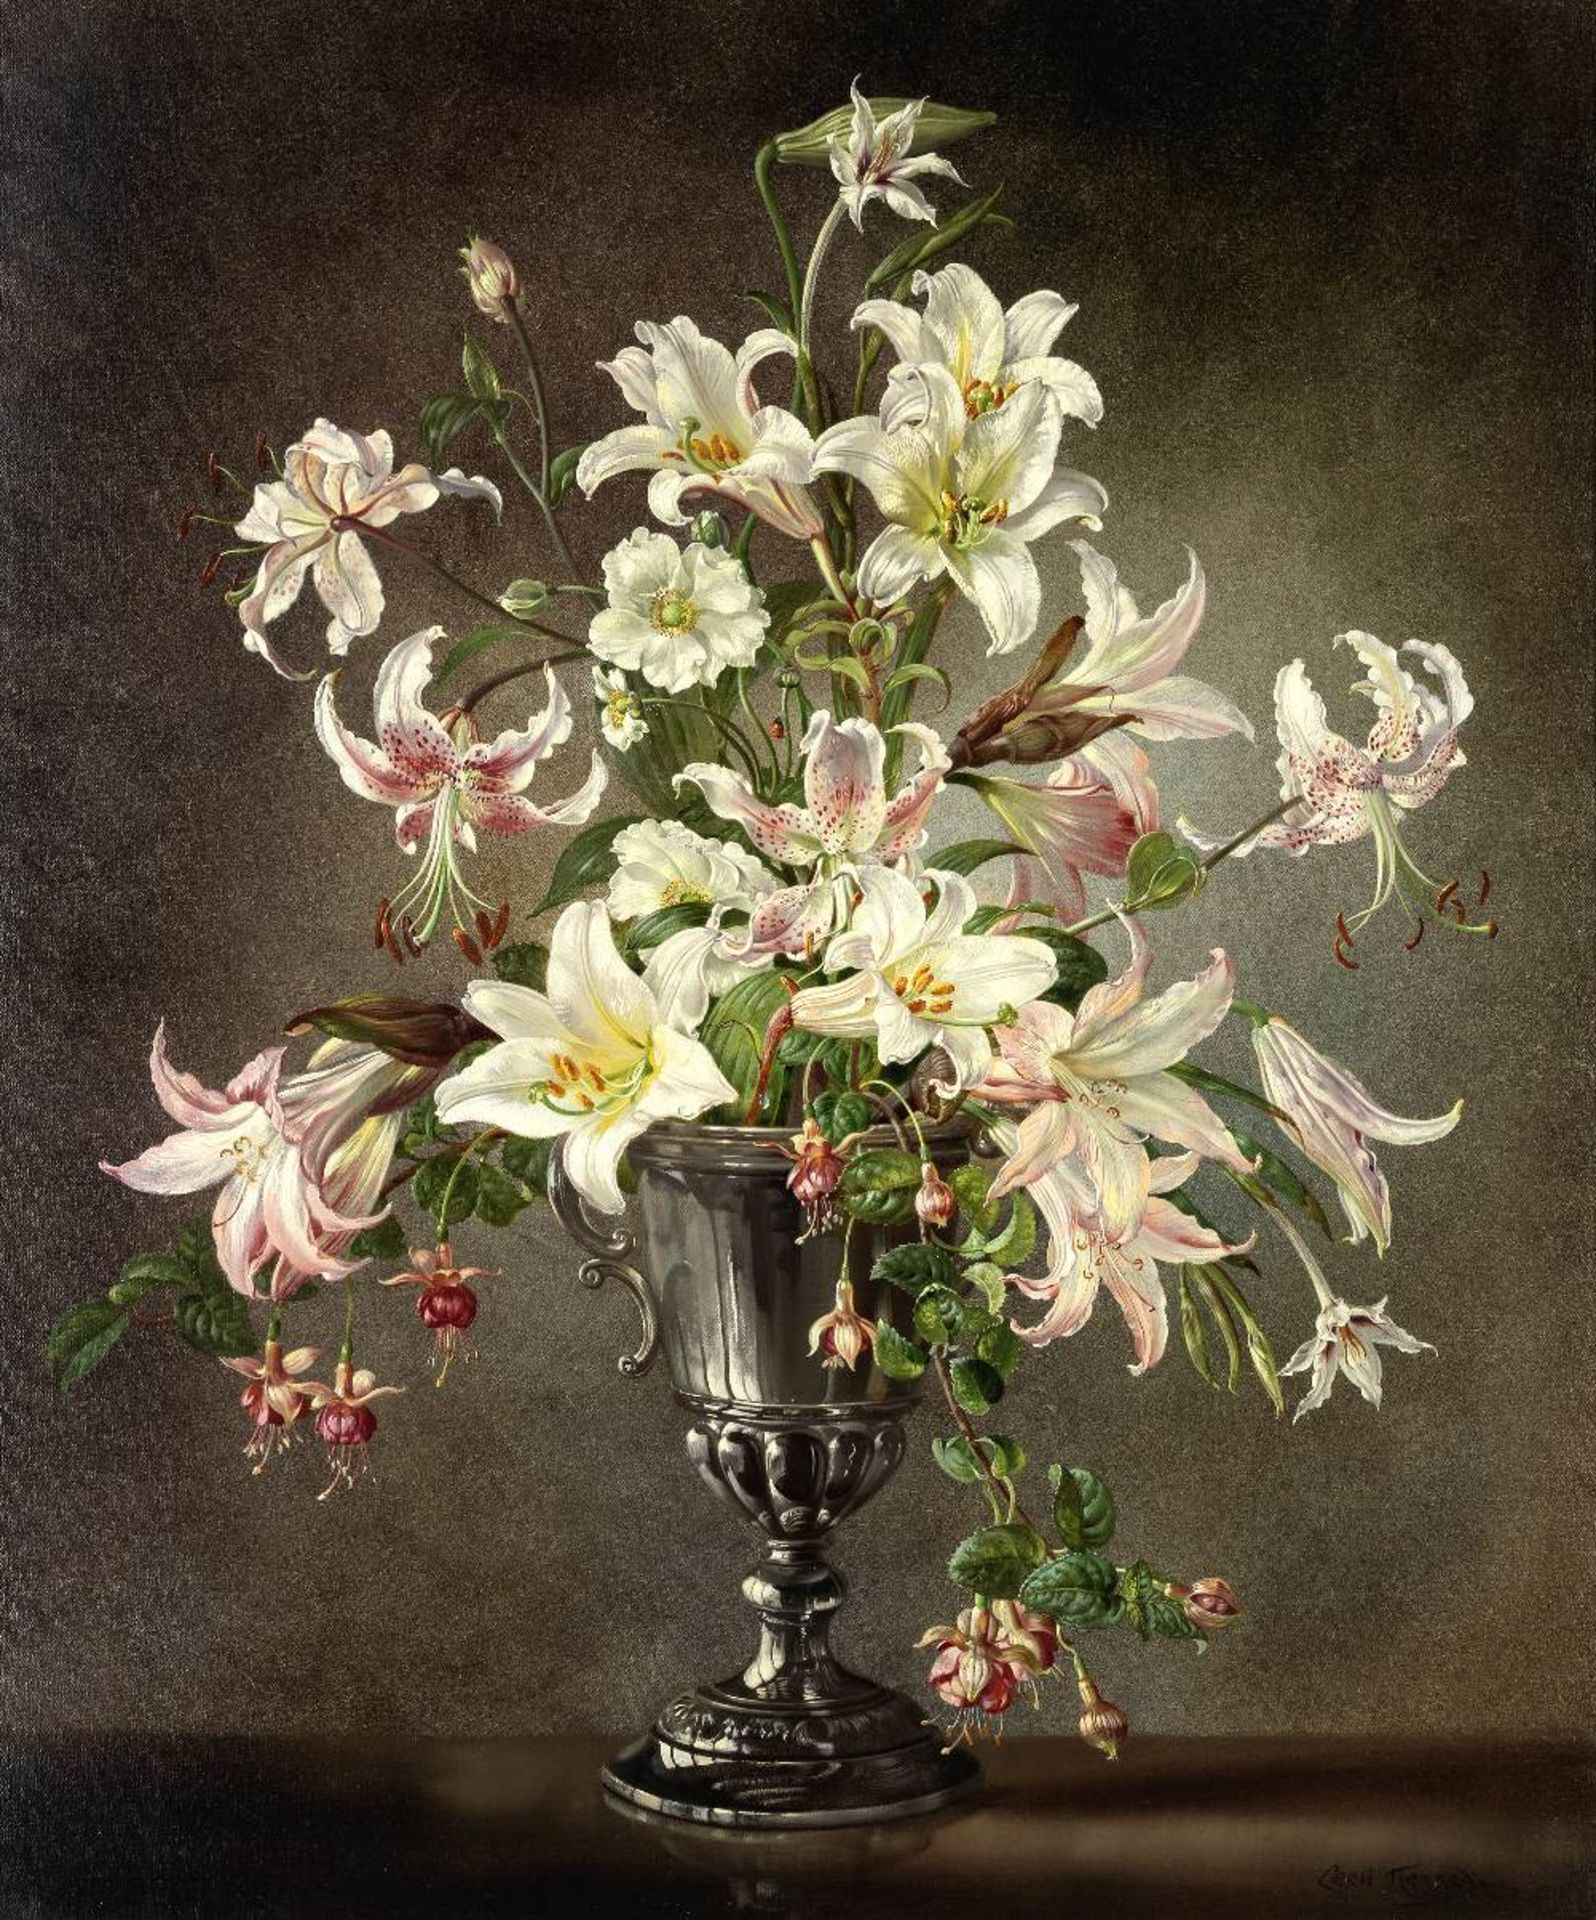 Cecil Kennedy (British, 1905-1997) Still life of lilies, fuchsias and japanese anemones